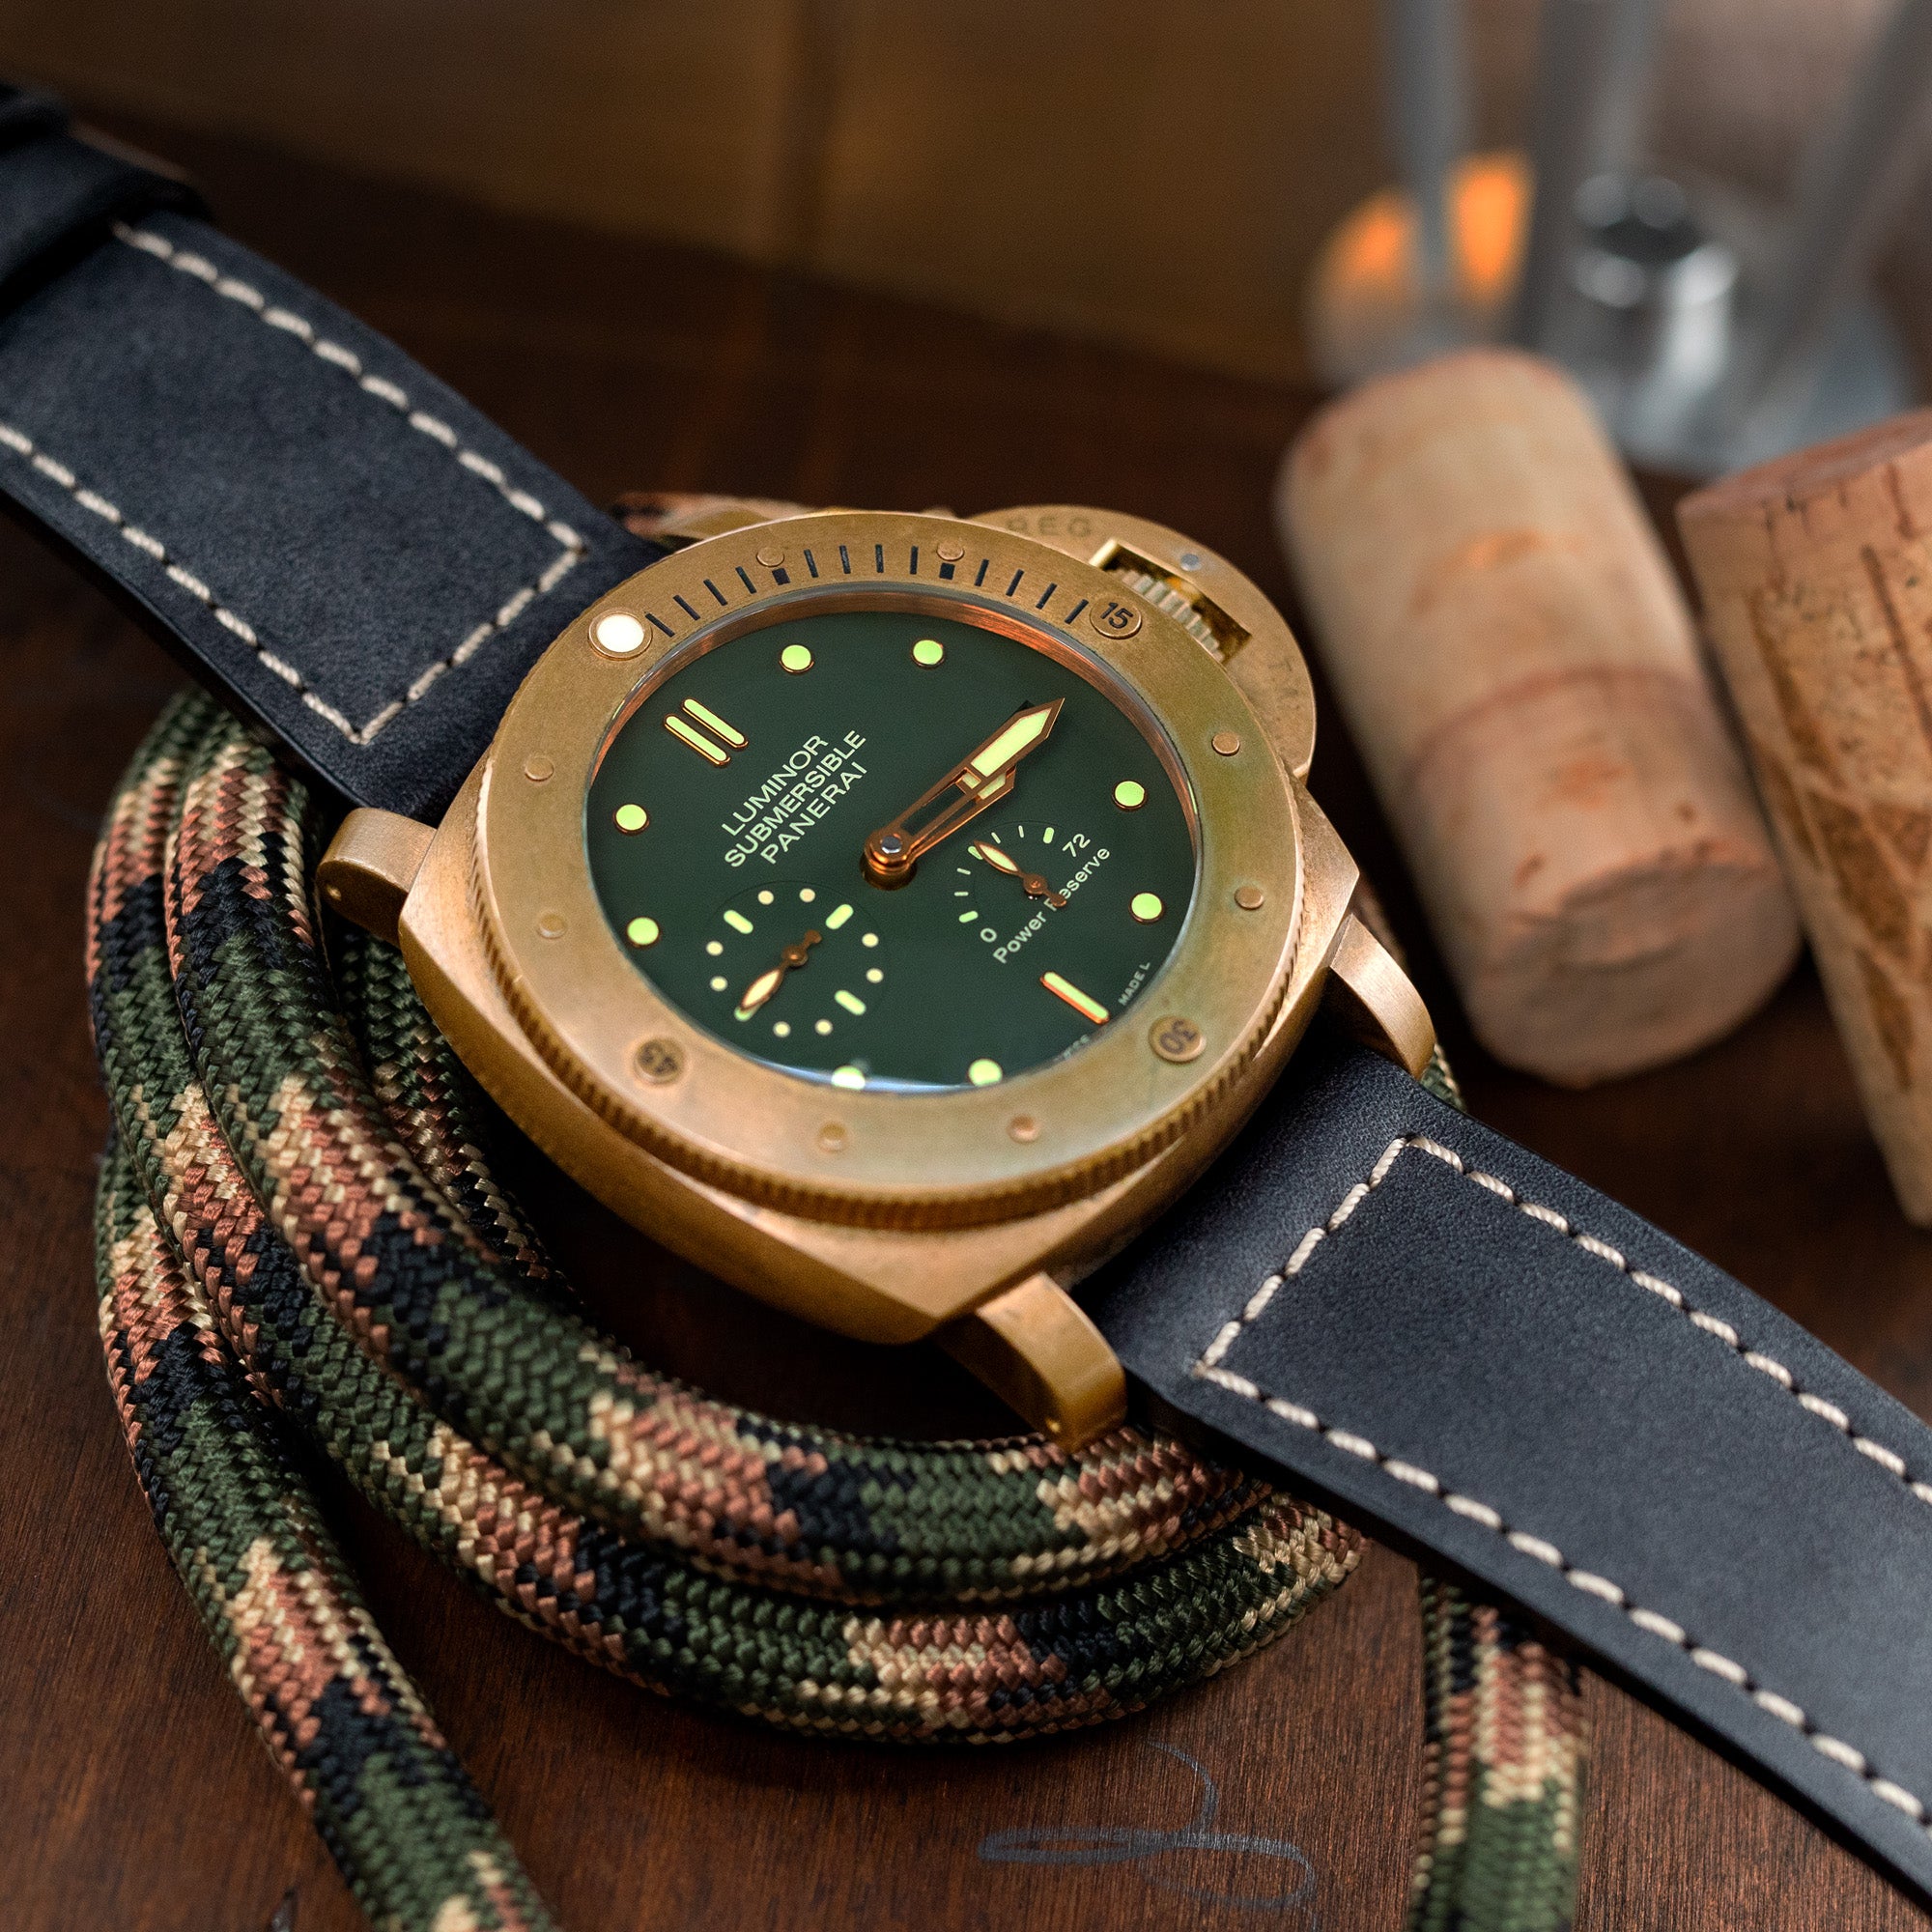 The Panerai Bronzo, with its bronze case that develops a unique patina over time, is the most sought-after and popular model from Panerai.